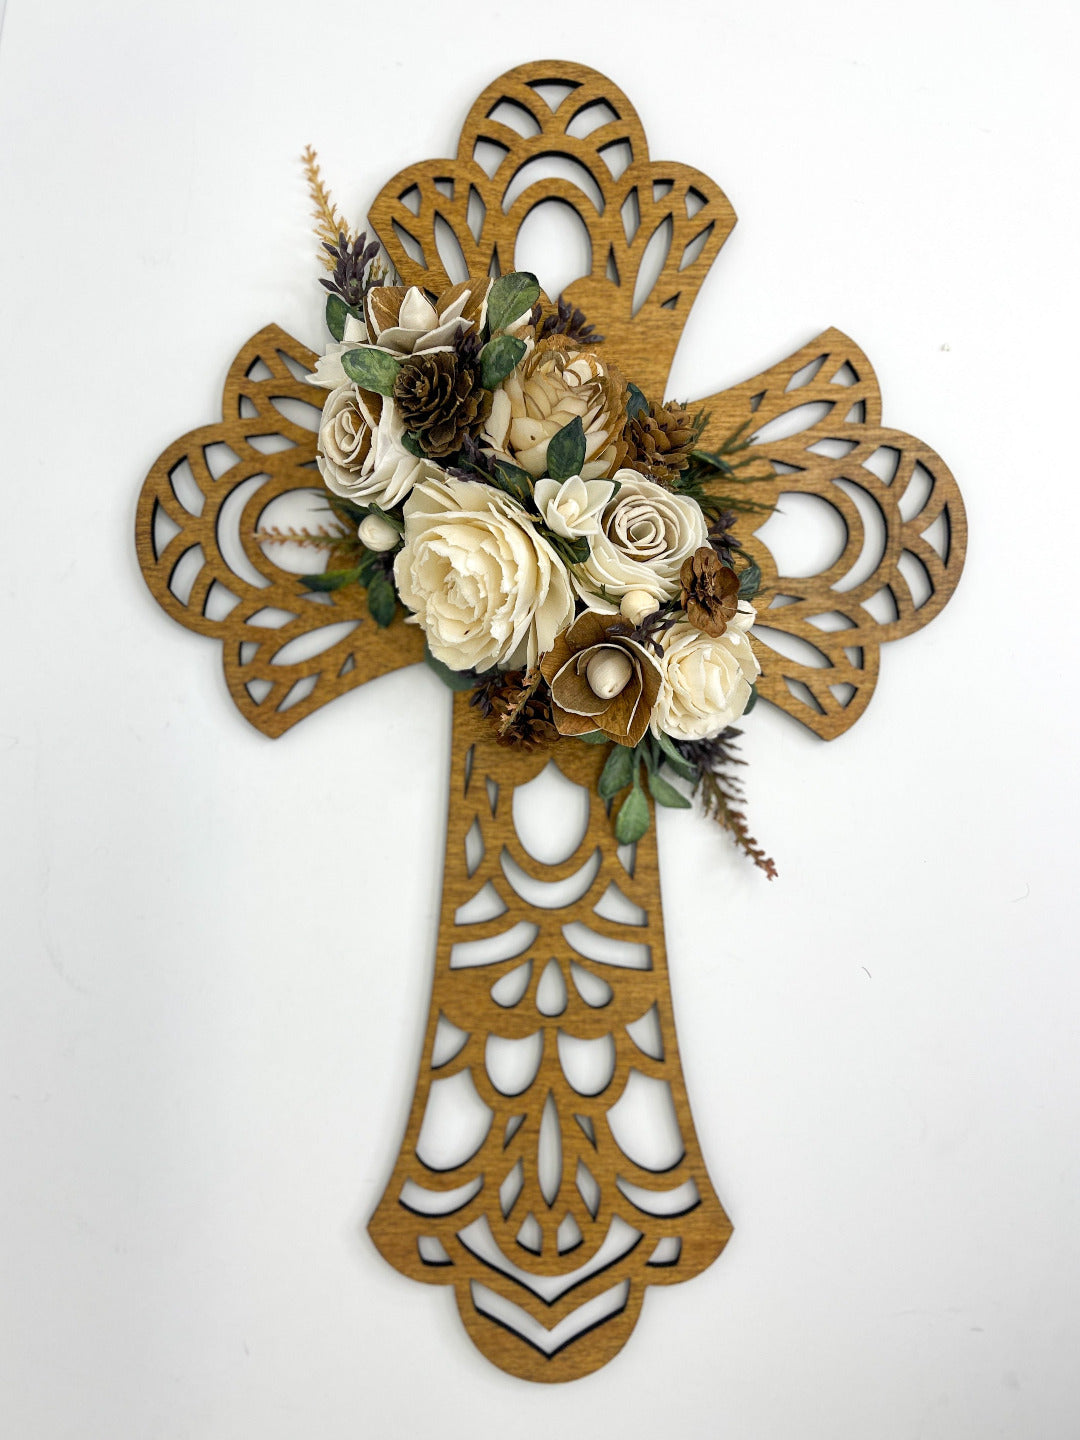 16 inch ornate wooden cross with handcrafted wooden Northwoods florals